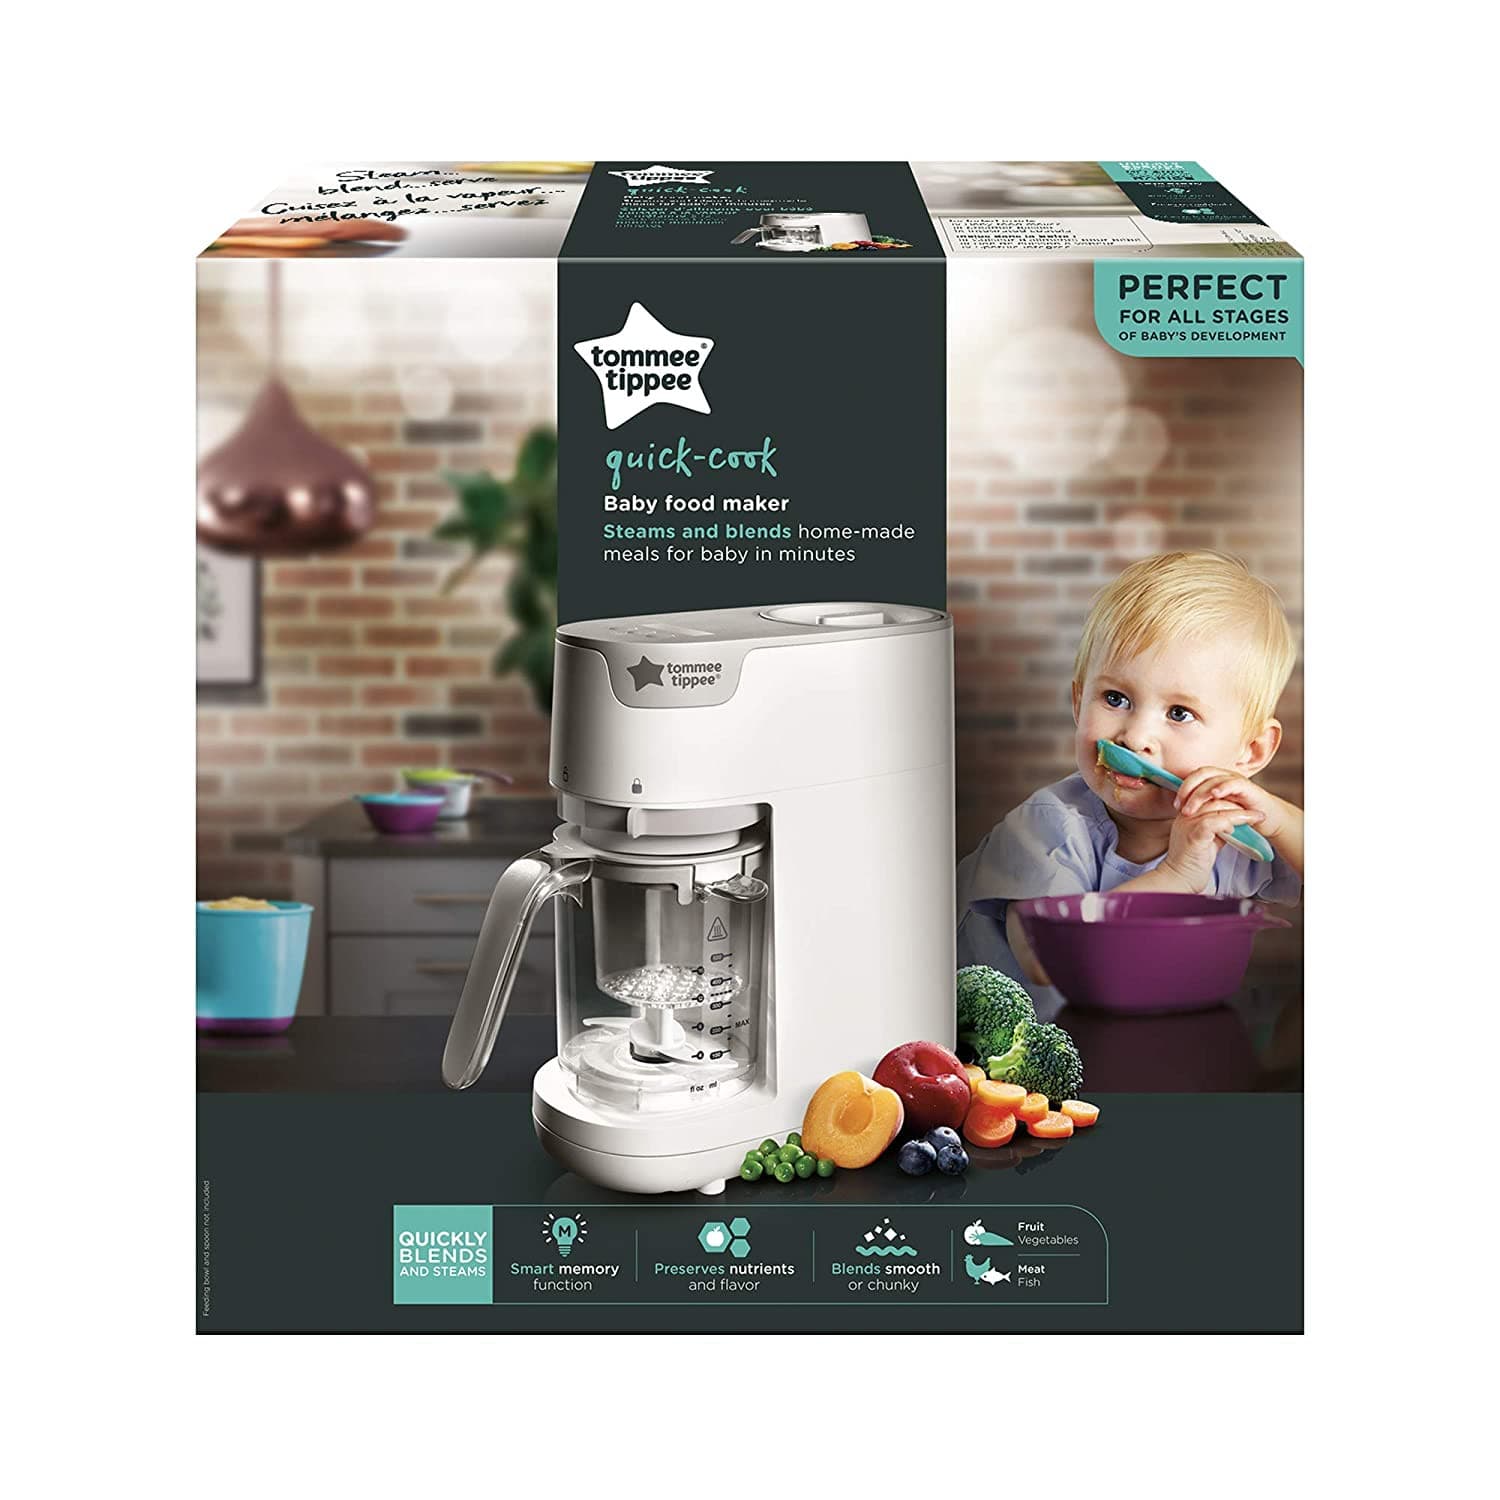 Tommee Tippee Quick Cook, Steamer Blender, with Recipe Guide, White.